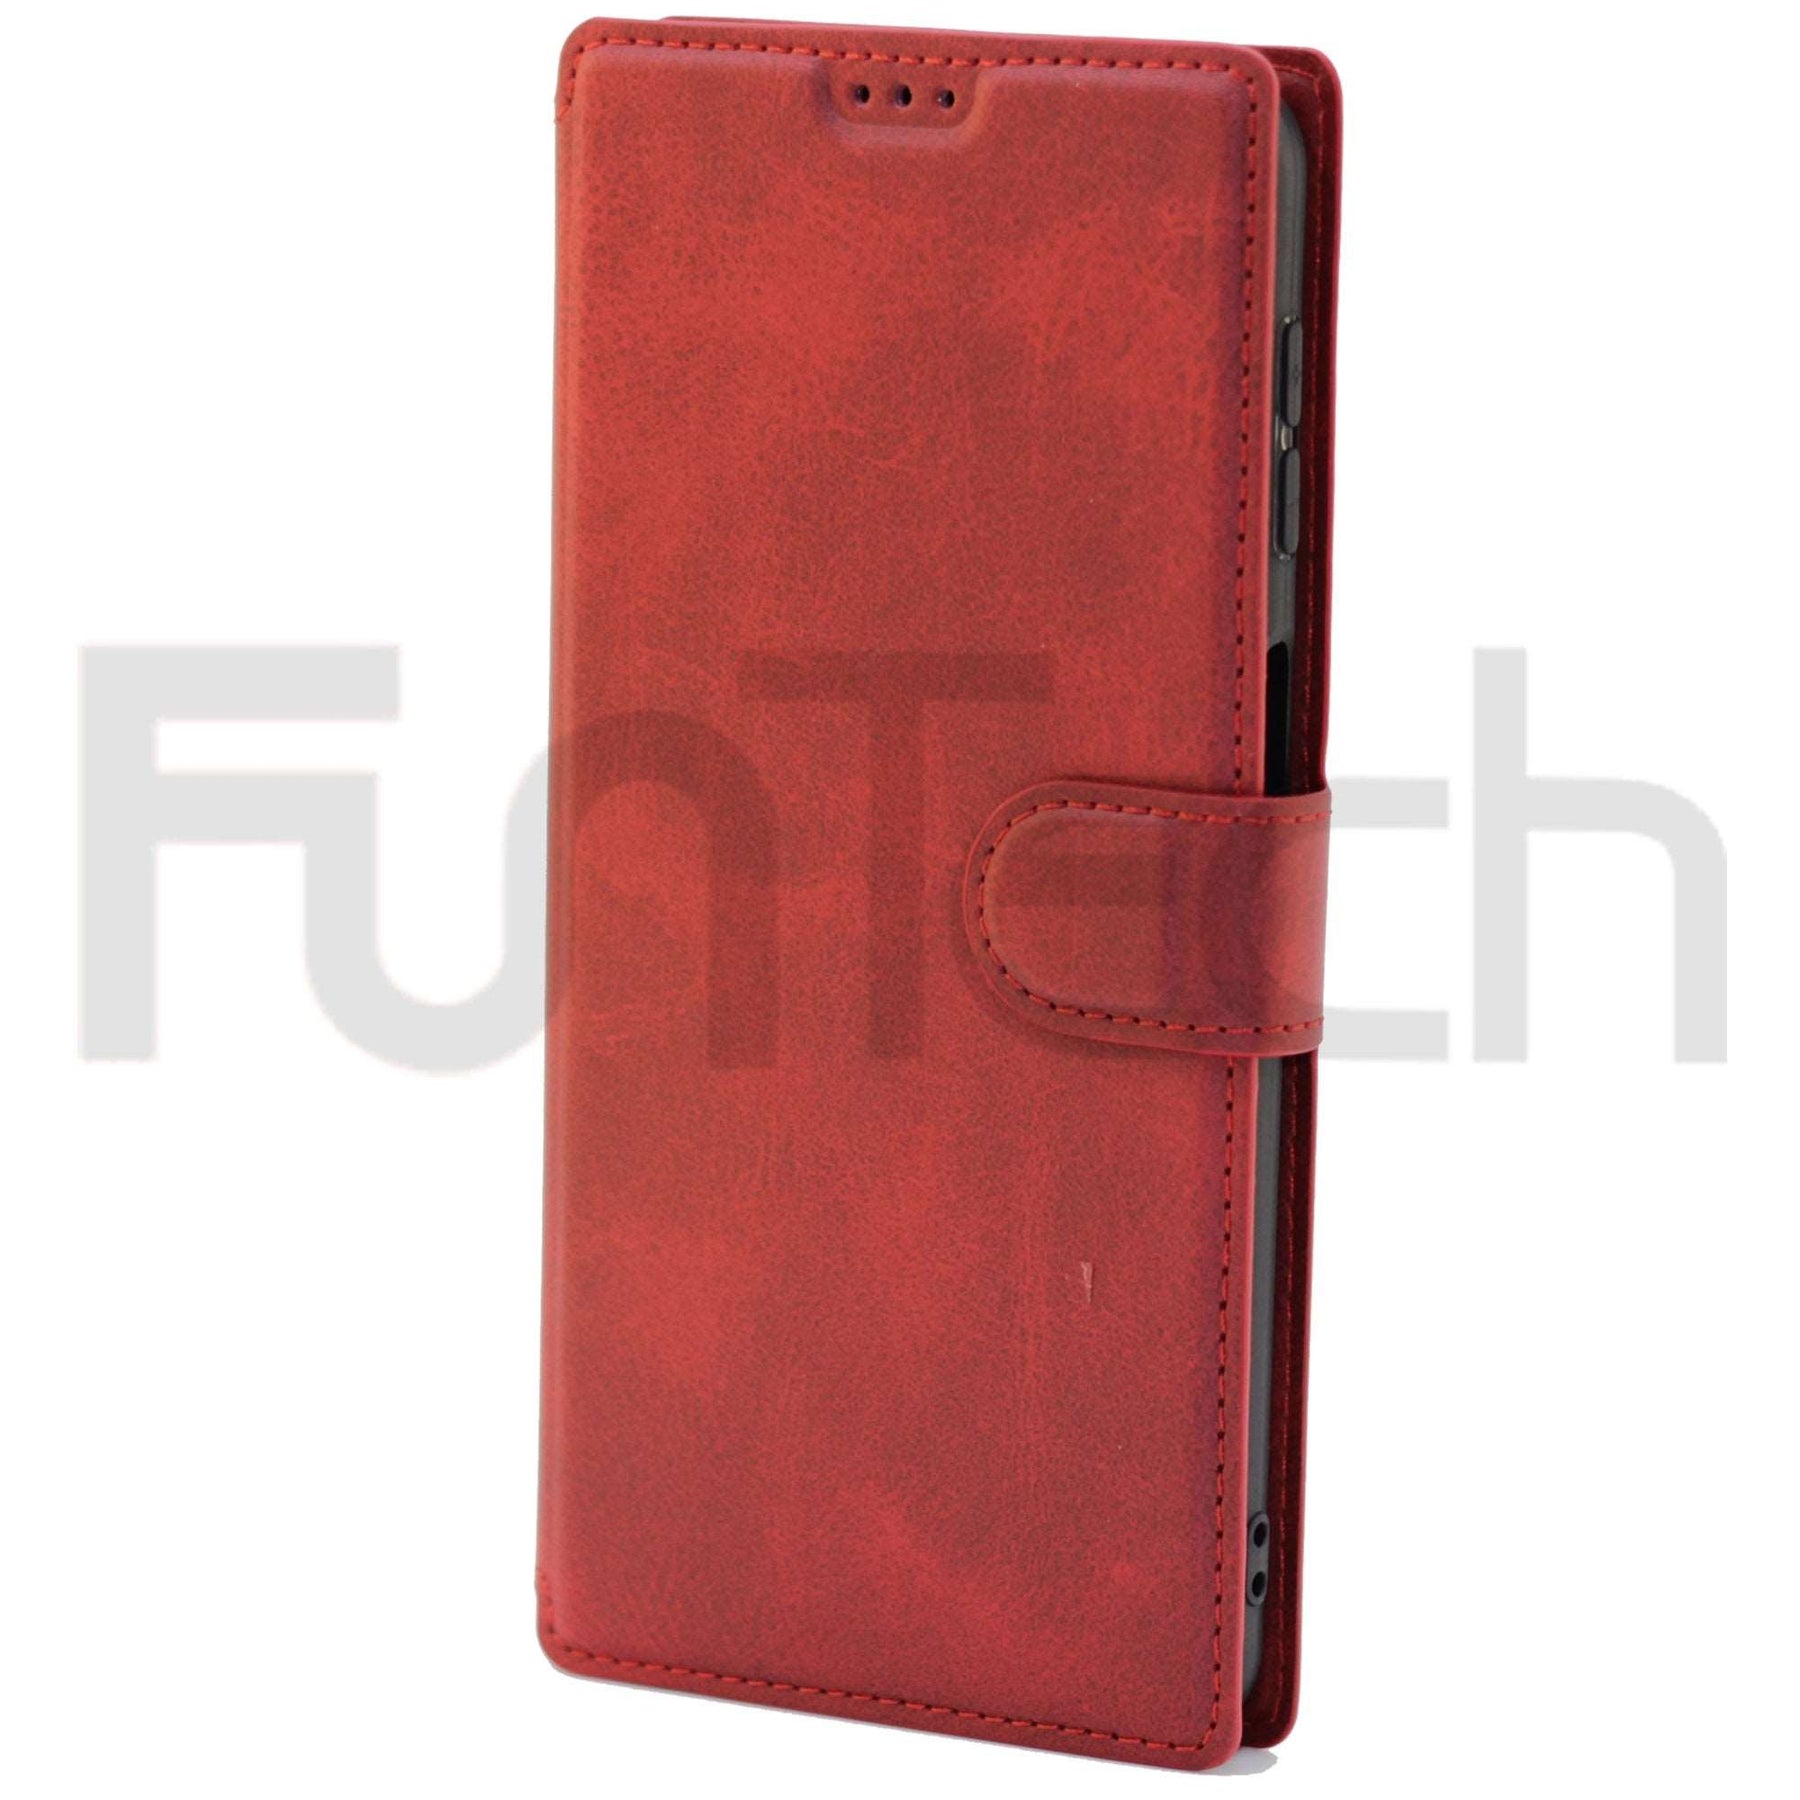 Samsung A32 Leather Wallet Case Color Red 5G